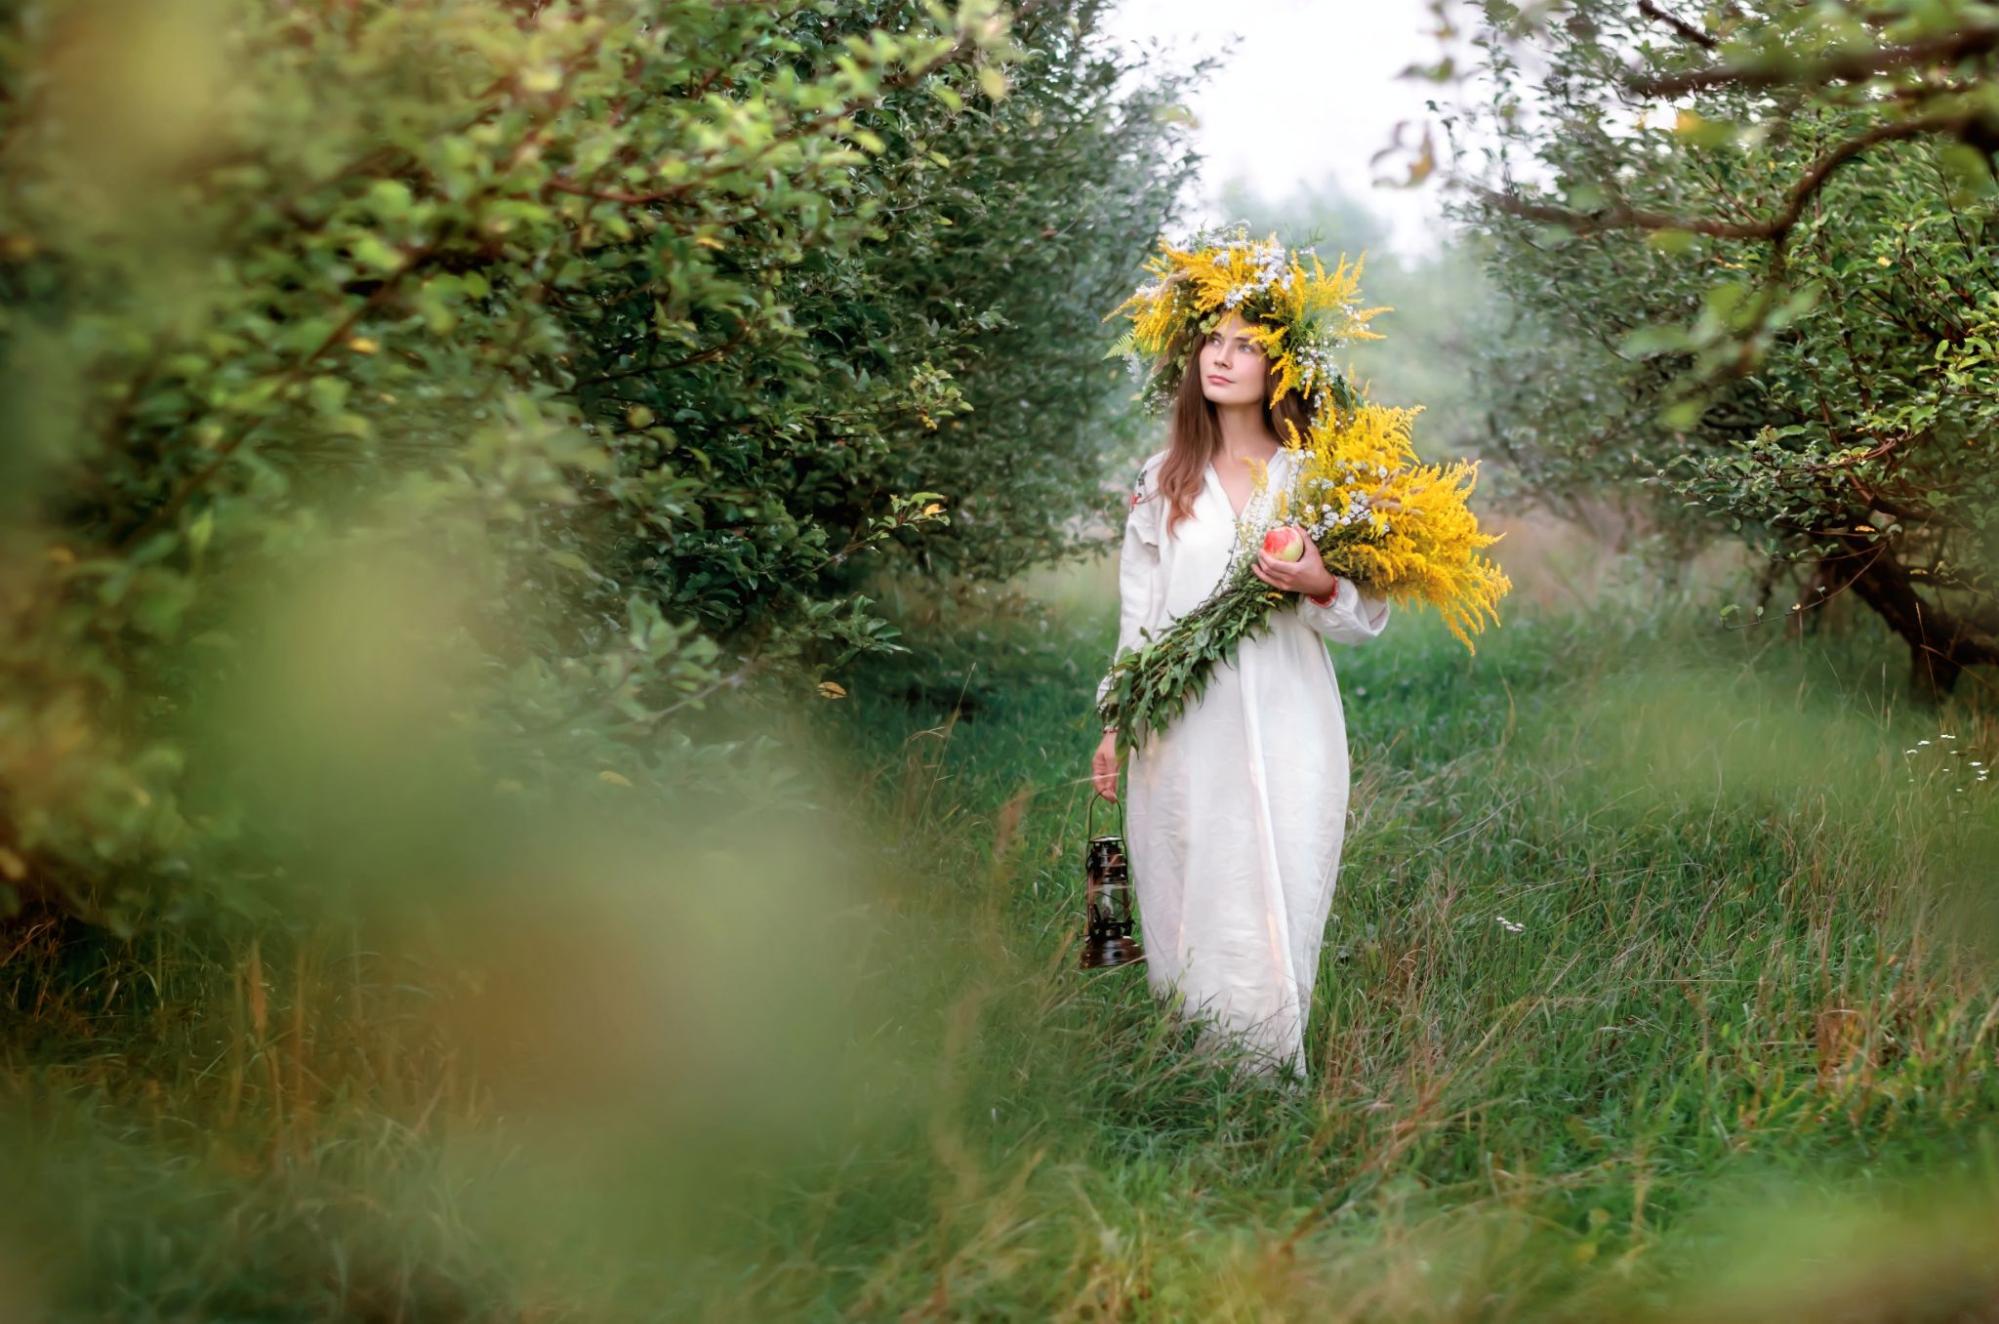 A young woman in a wreath and a long white national shirt collects wildflowers